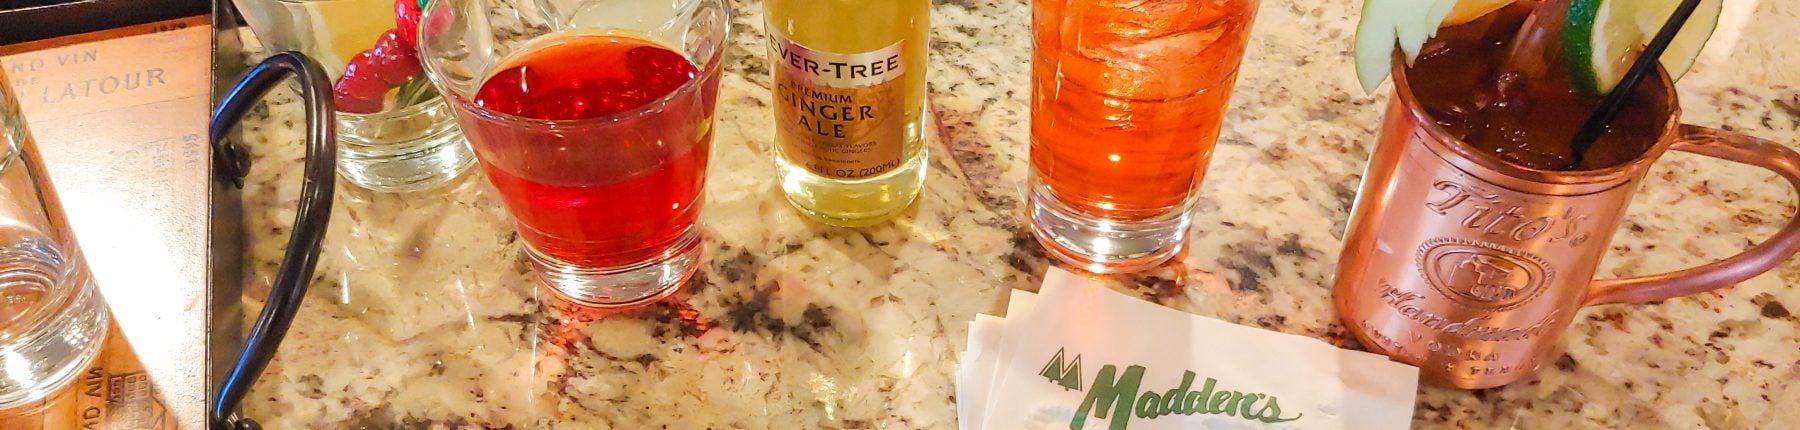 Cocktails next to a bottle of ginger ale placed on a marble counter with Madden's napkins